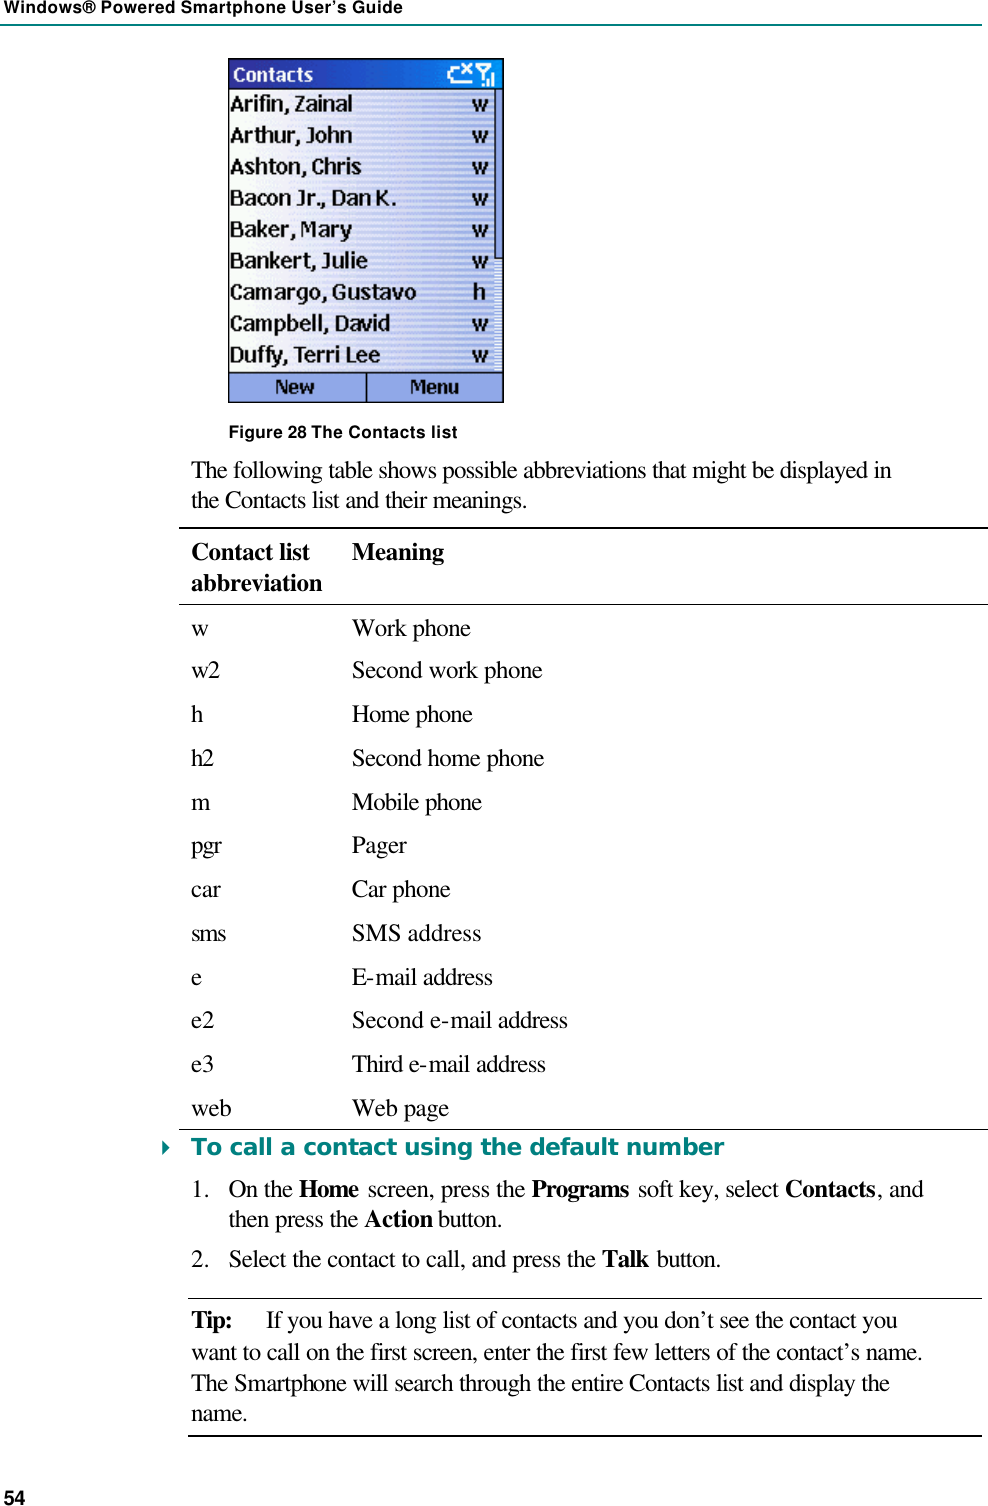 Windows® Powered Smartphone User’s Guide 54  Figure 28 The Contacts list The following table shows possible abbreviations that might be displayed in the Contacts list and their meanings. Contact list abbreviation Meaning w Work phone w2 Second work phone h  Home phone h2 Second home phone m Mobile phone pgr Pager car Car phone sms SMS address e E-mail address e2 Second e-mail address e3 Third e-mail address web Web page 4 To call a contact using the default number 1.  On the Home screen, press the Programs soft key, select Contacts, and then press the Action button. 2.  Select the contact to call, and press the Talk button. Tip: If you have a long list of contacts and you don’t see the contact you want to call on the first screen, enter the first few letters of the contact’s name. The Smartphone will search through the entire Contacts list and display the name. 